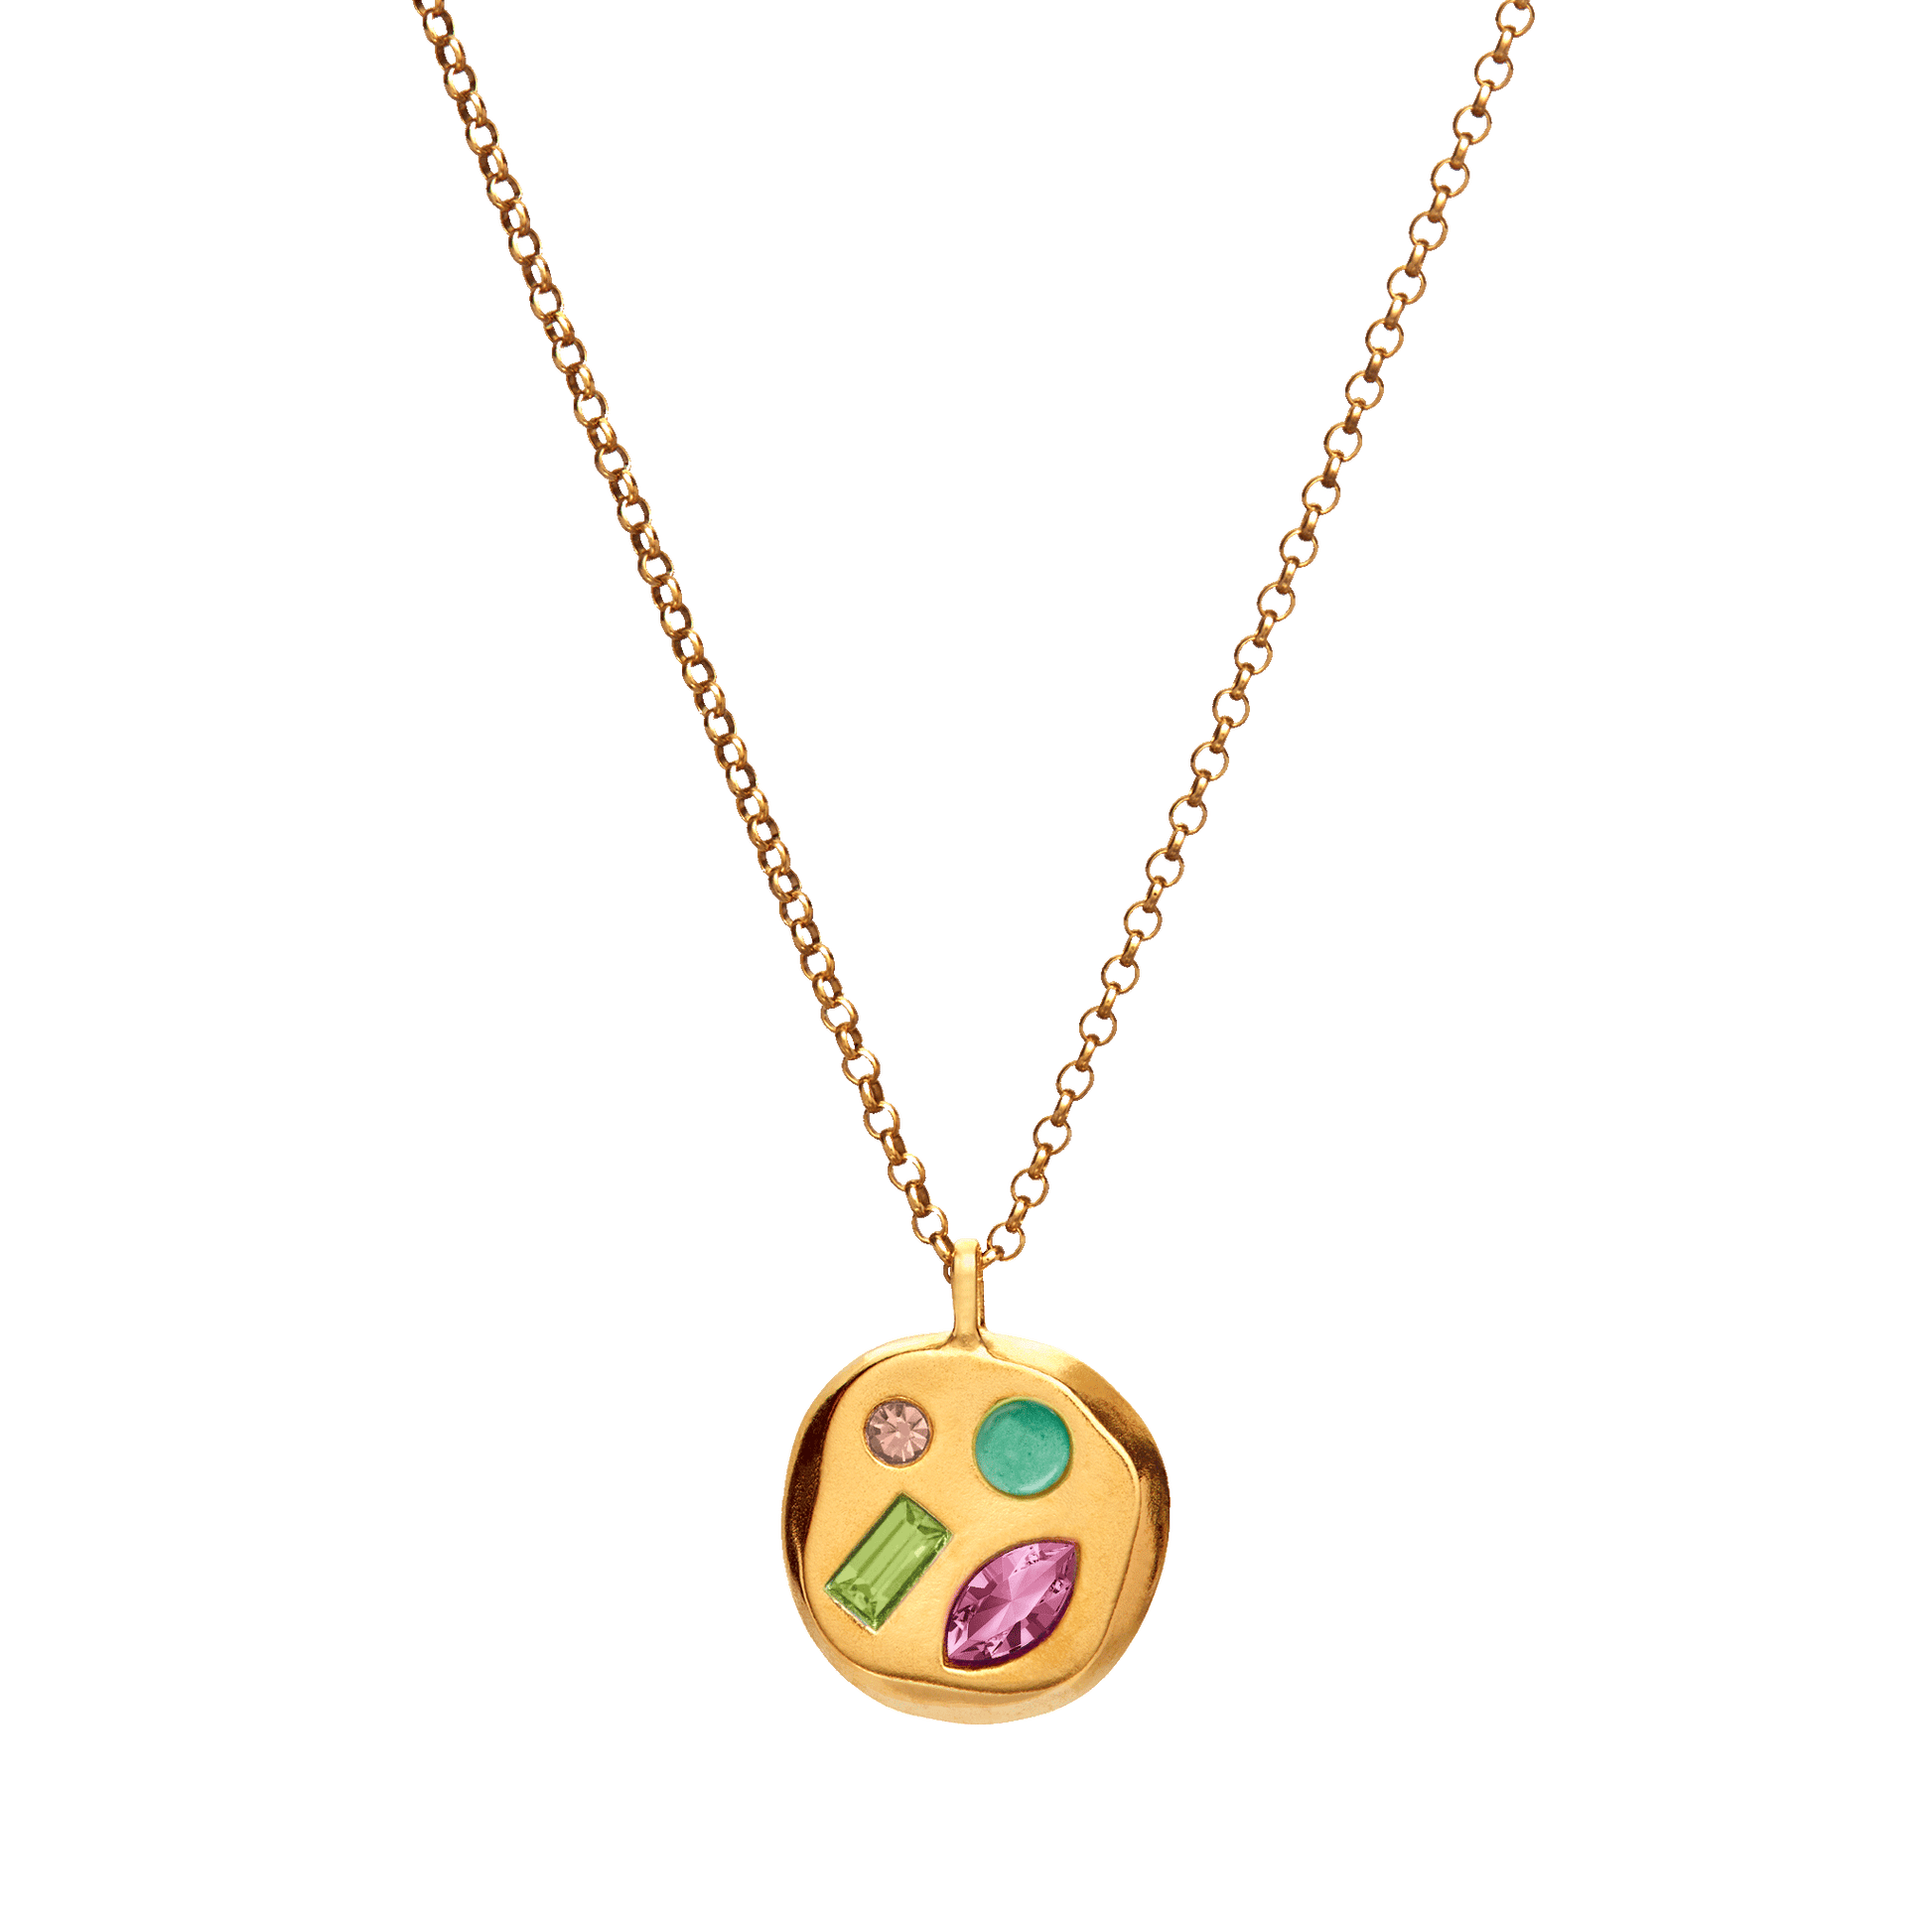 The October Second Pendant